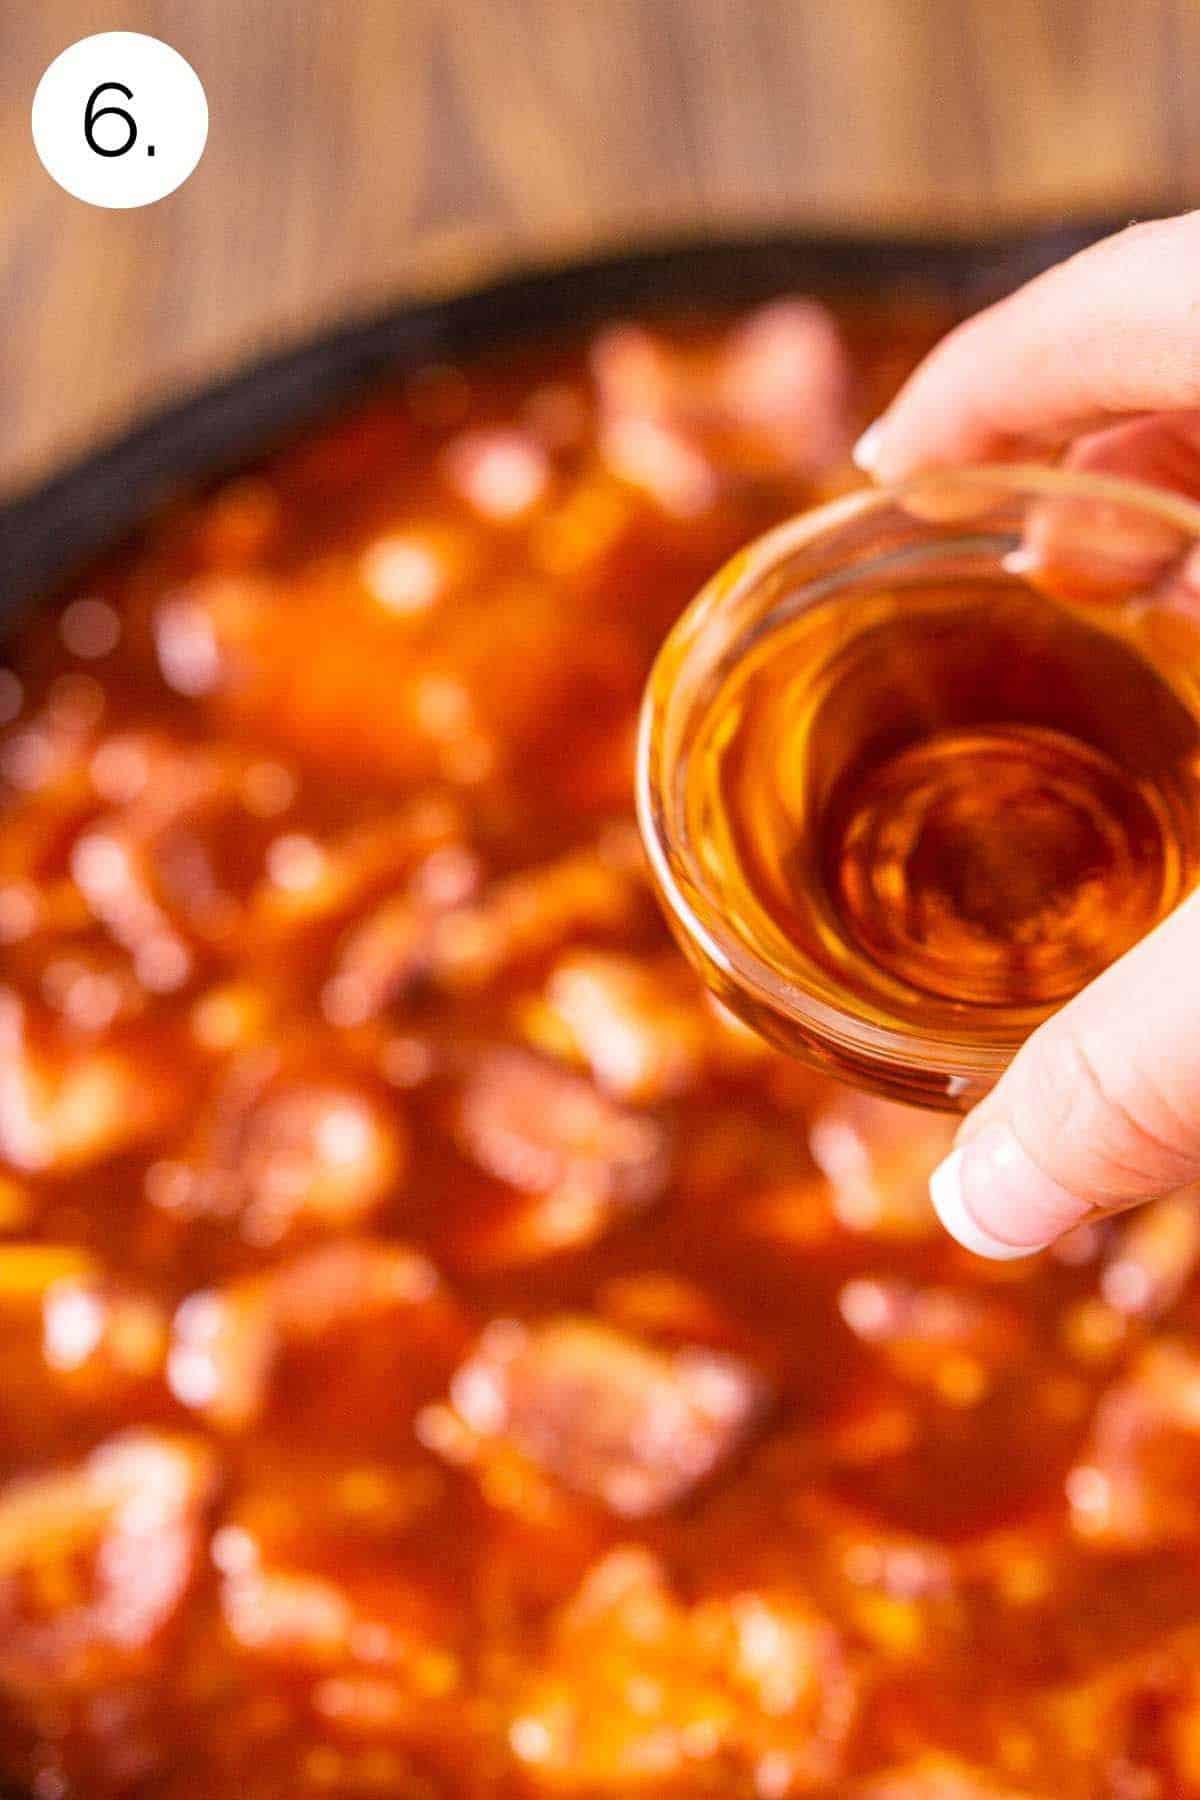 Pouring the bourbon into the baked beans after smoking for three hours.